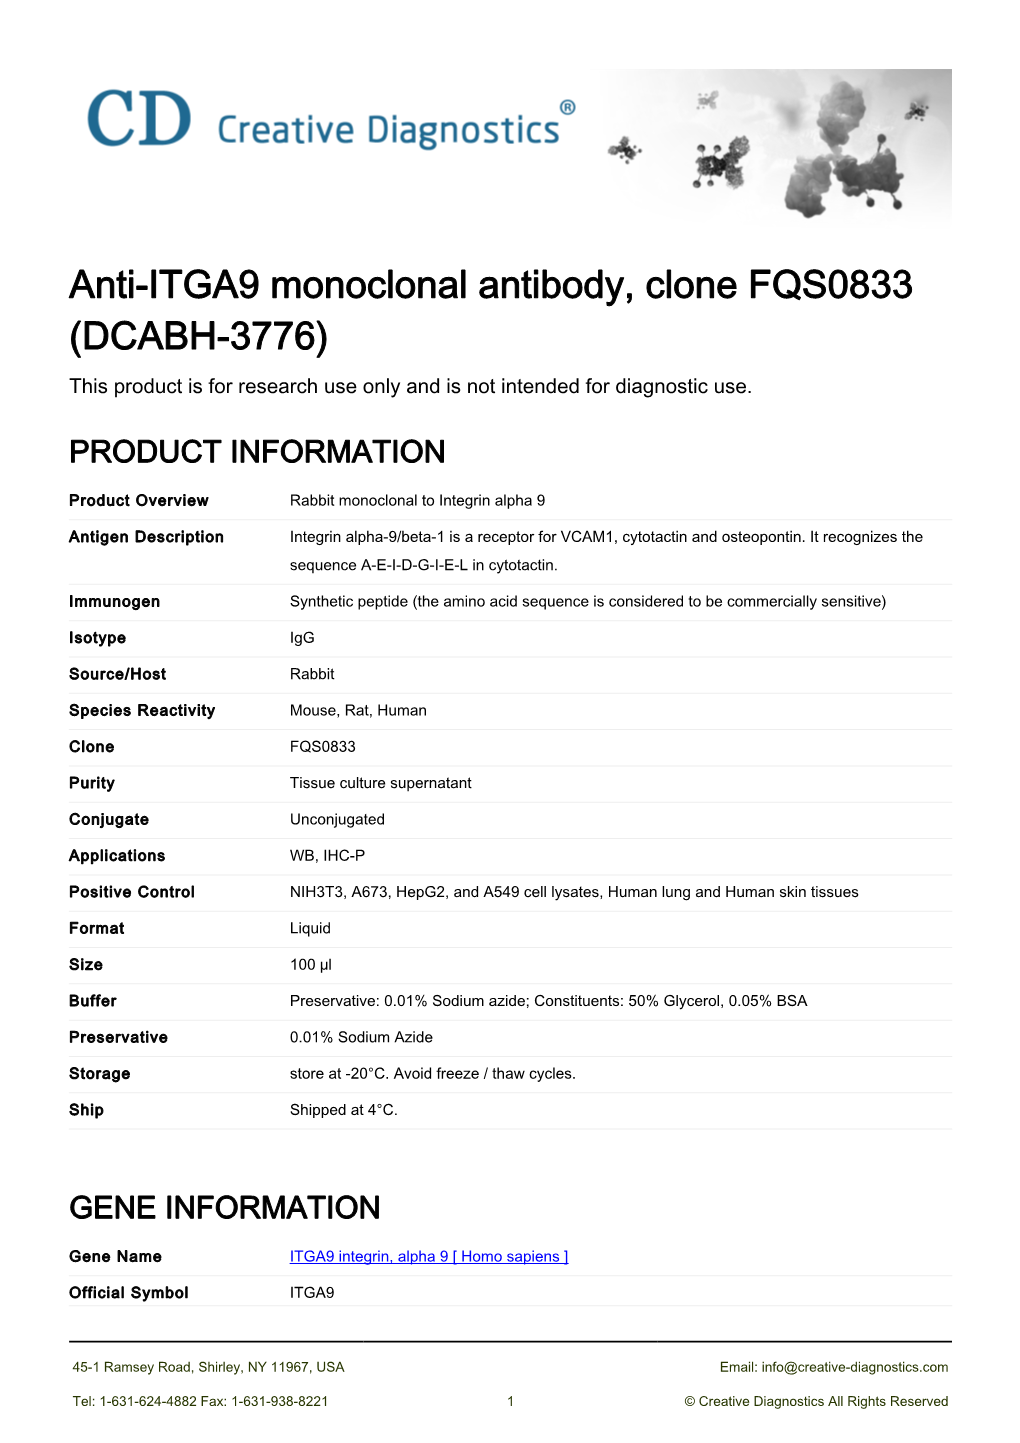 Anti-ITGA9 Monoclonal Antibody, Clone FQS0833 (DCABH-3776) This Product Is for Research Use Only and Is Not Intended for Diagnostic Use